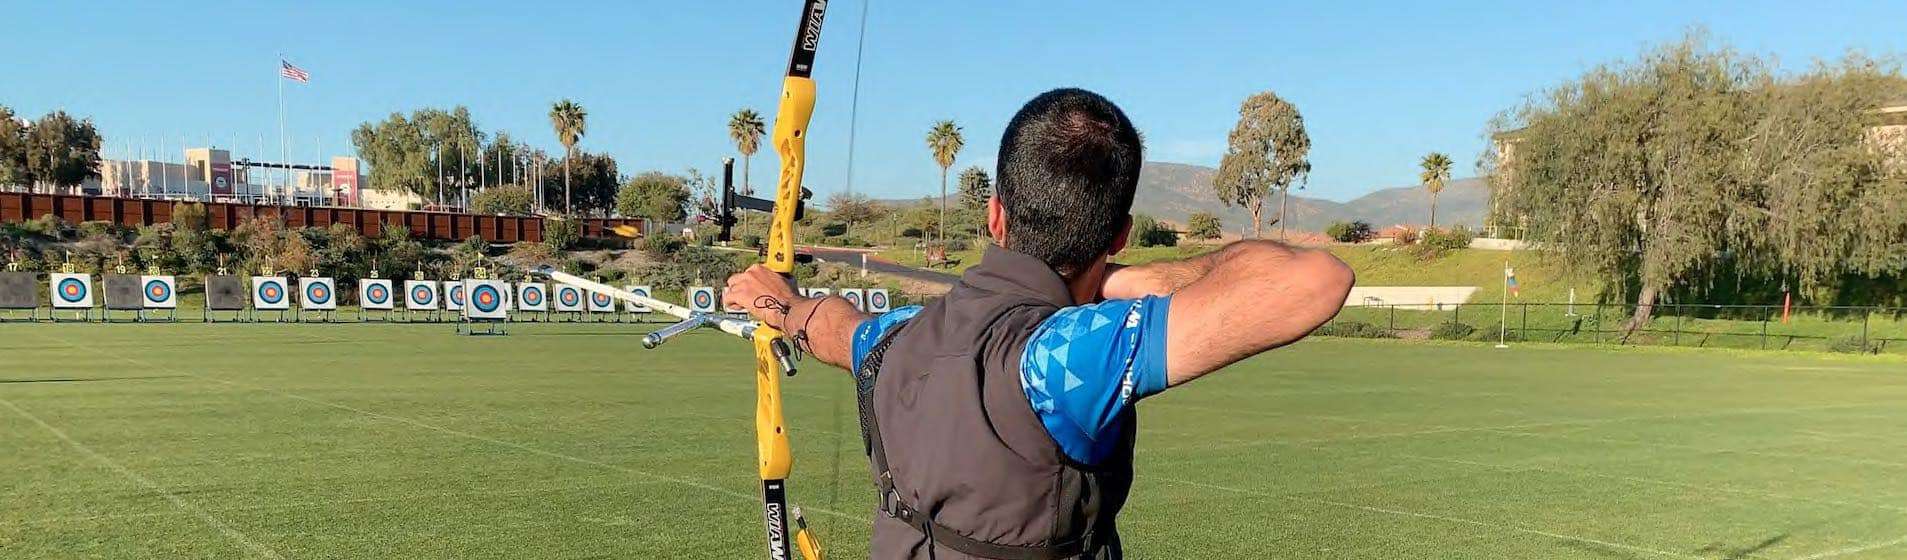 archery coaching and private lessons